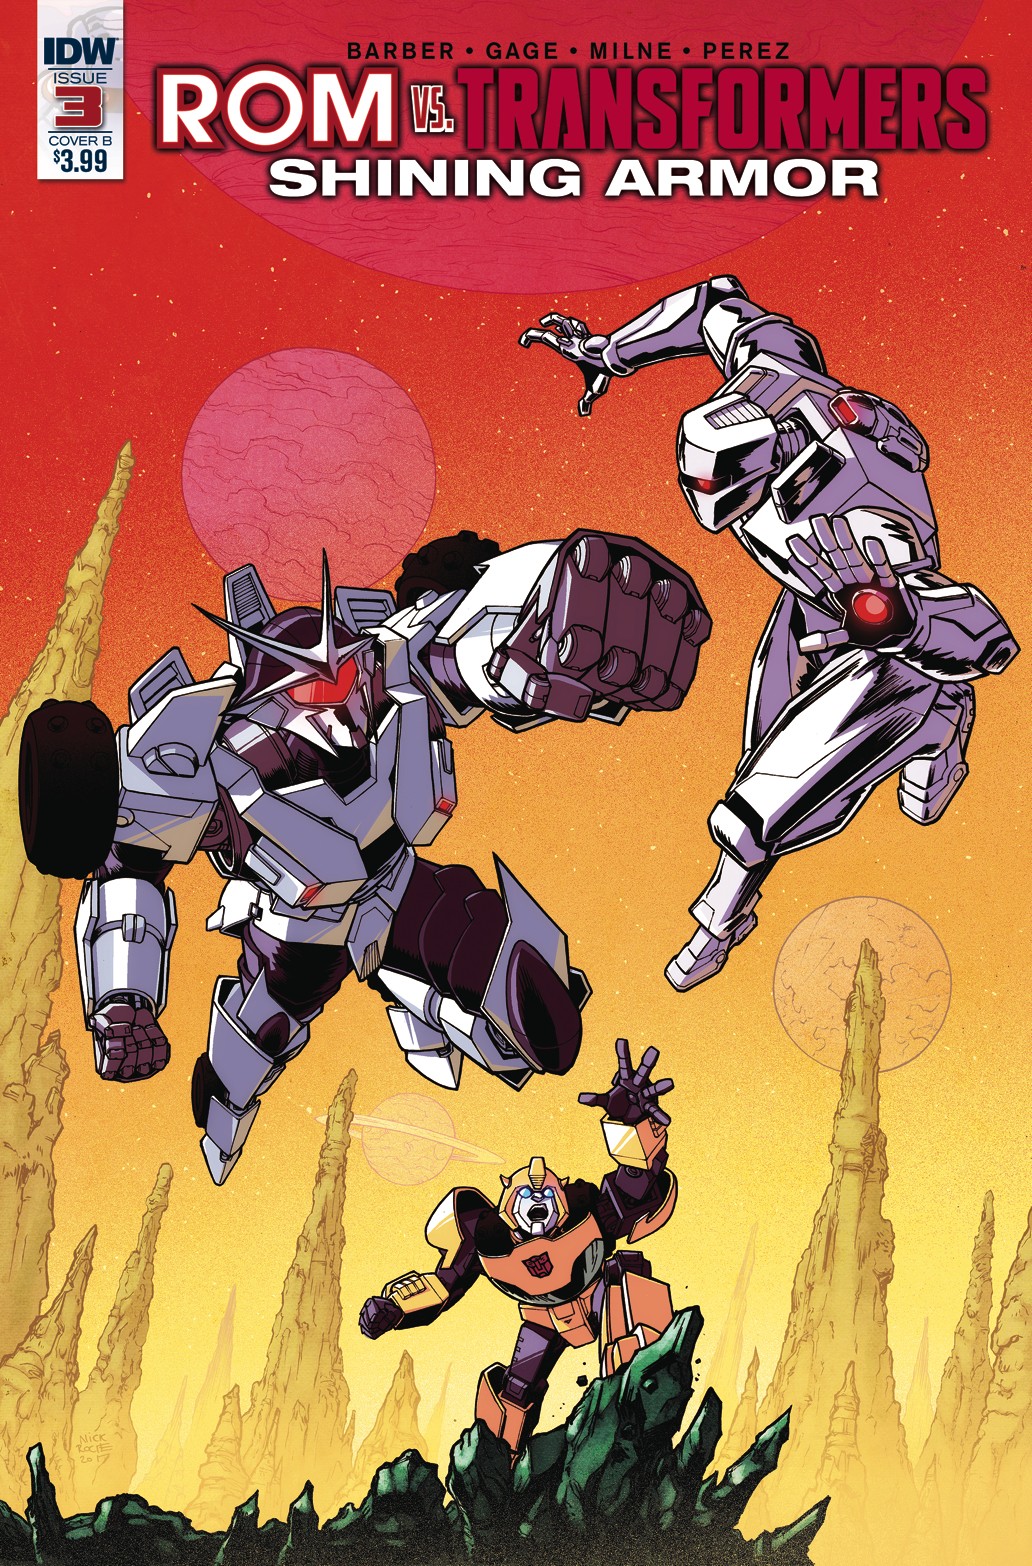 Transformers News: Variant Covers for IDW Rom Vs. Transformers: Shining Armor #3, by Roche/Burcham and Coller/Lafuente